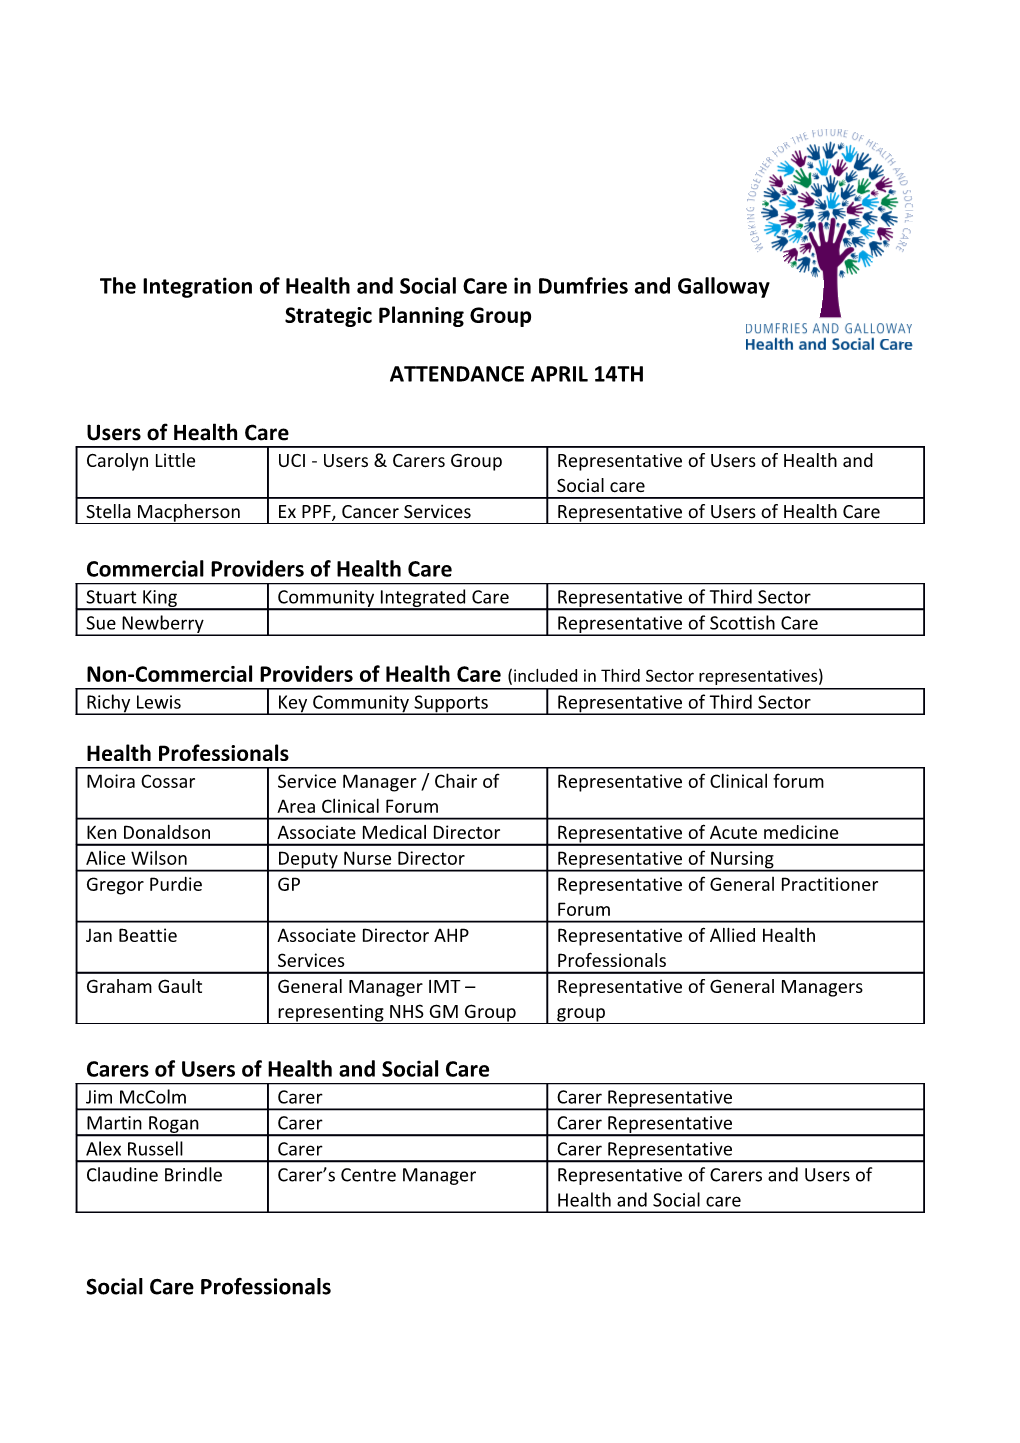 The Integration of Health and Social Care in Dumfries and Galloway